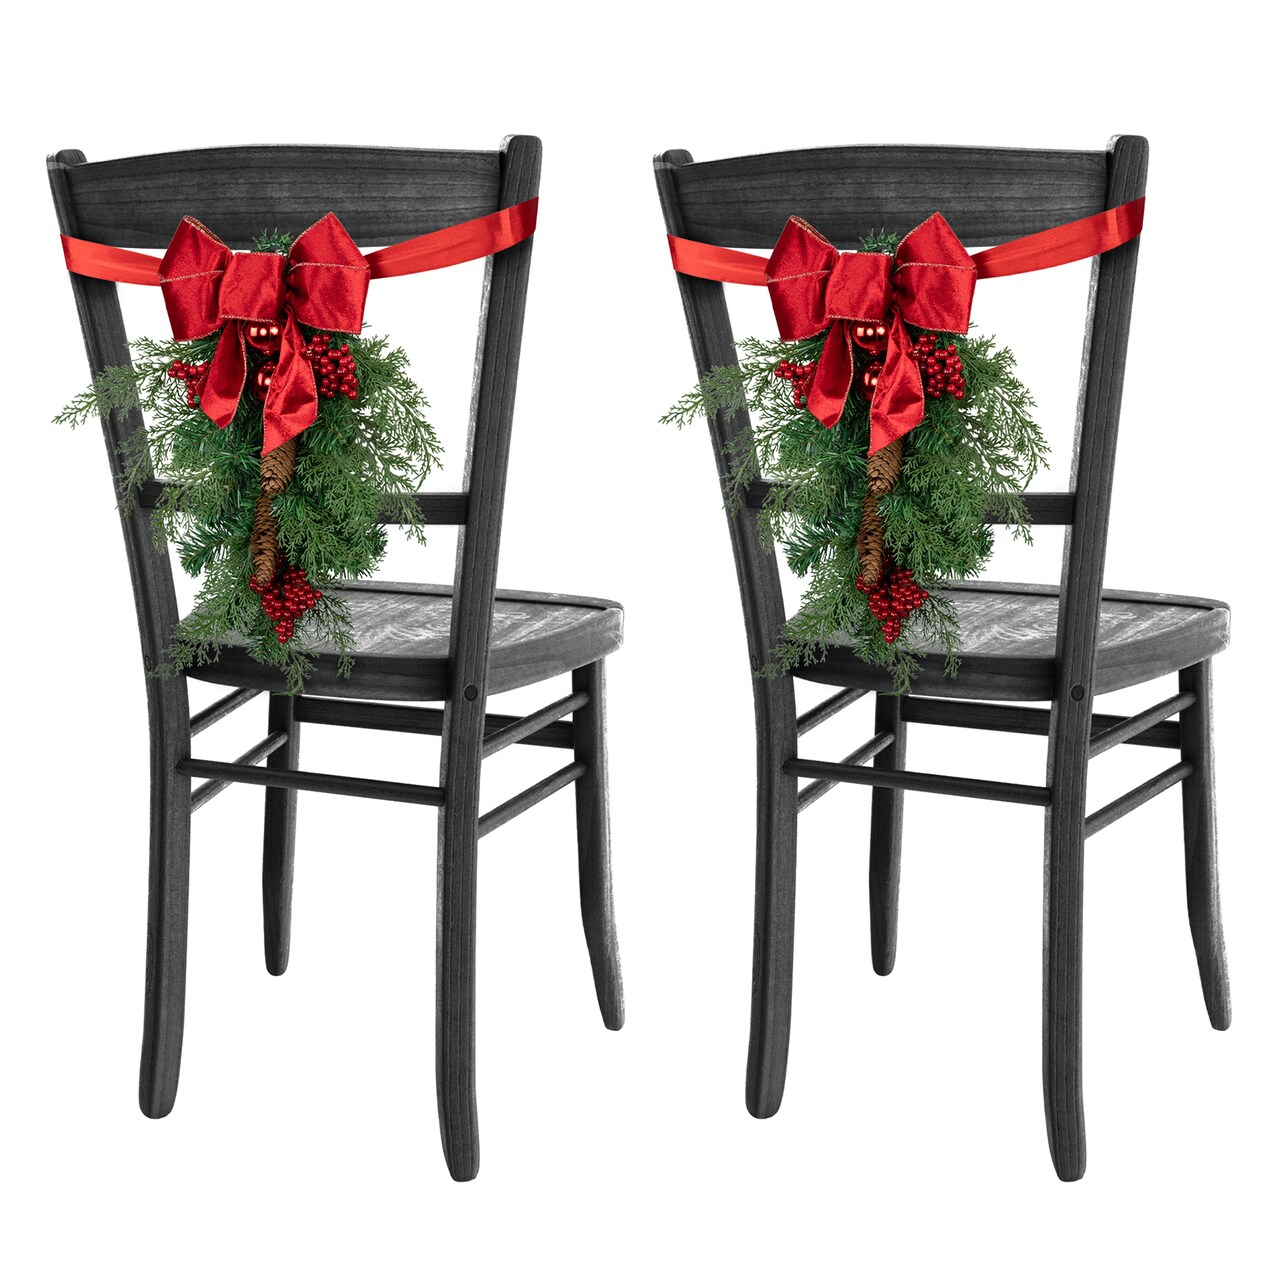 Northlight Set of 2 Mixed Cedar and Pine Christmas Chair Back Swags